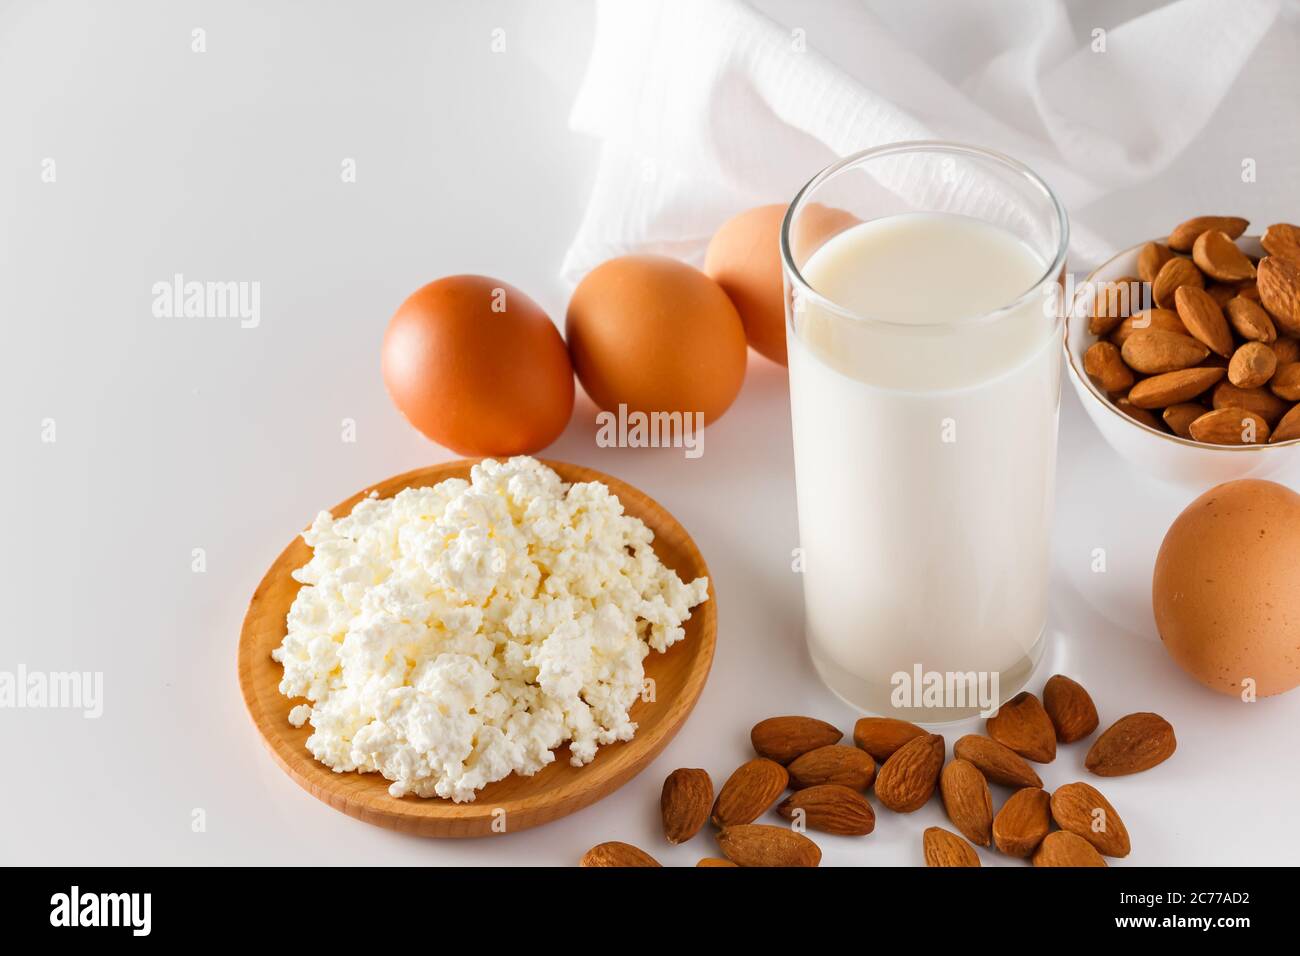 High protein food on a white background - cottage cheese, eggs, nuts. A set of healthy foods for a balanced diet. Stock Photo